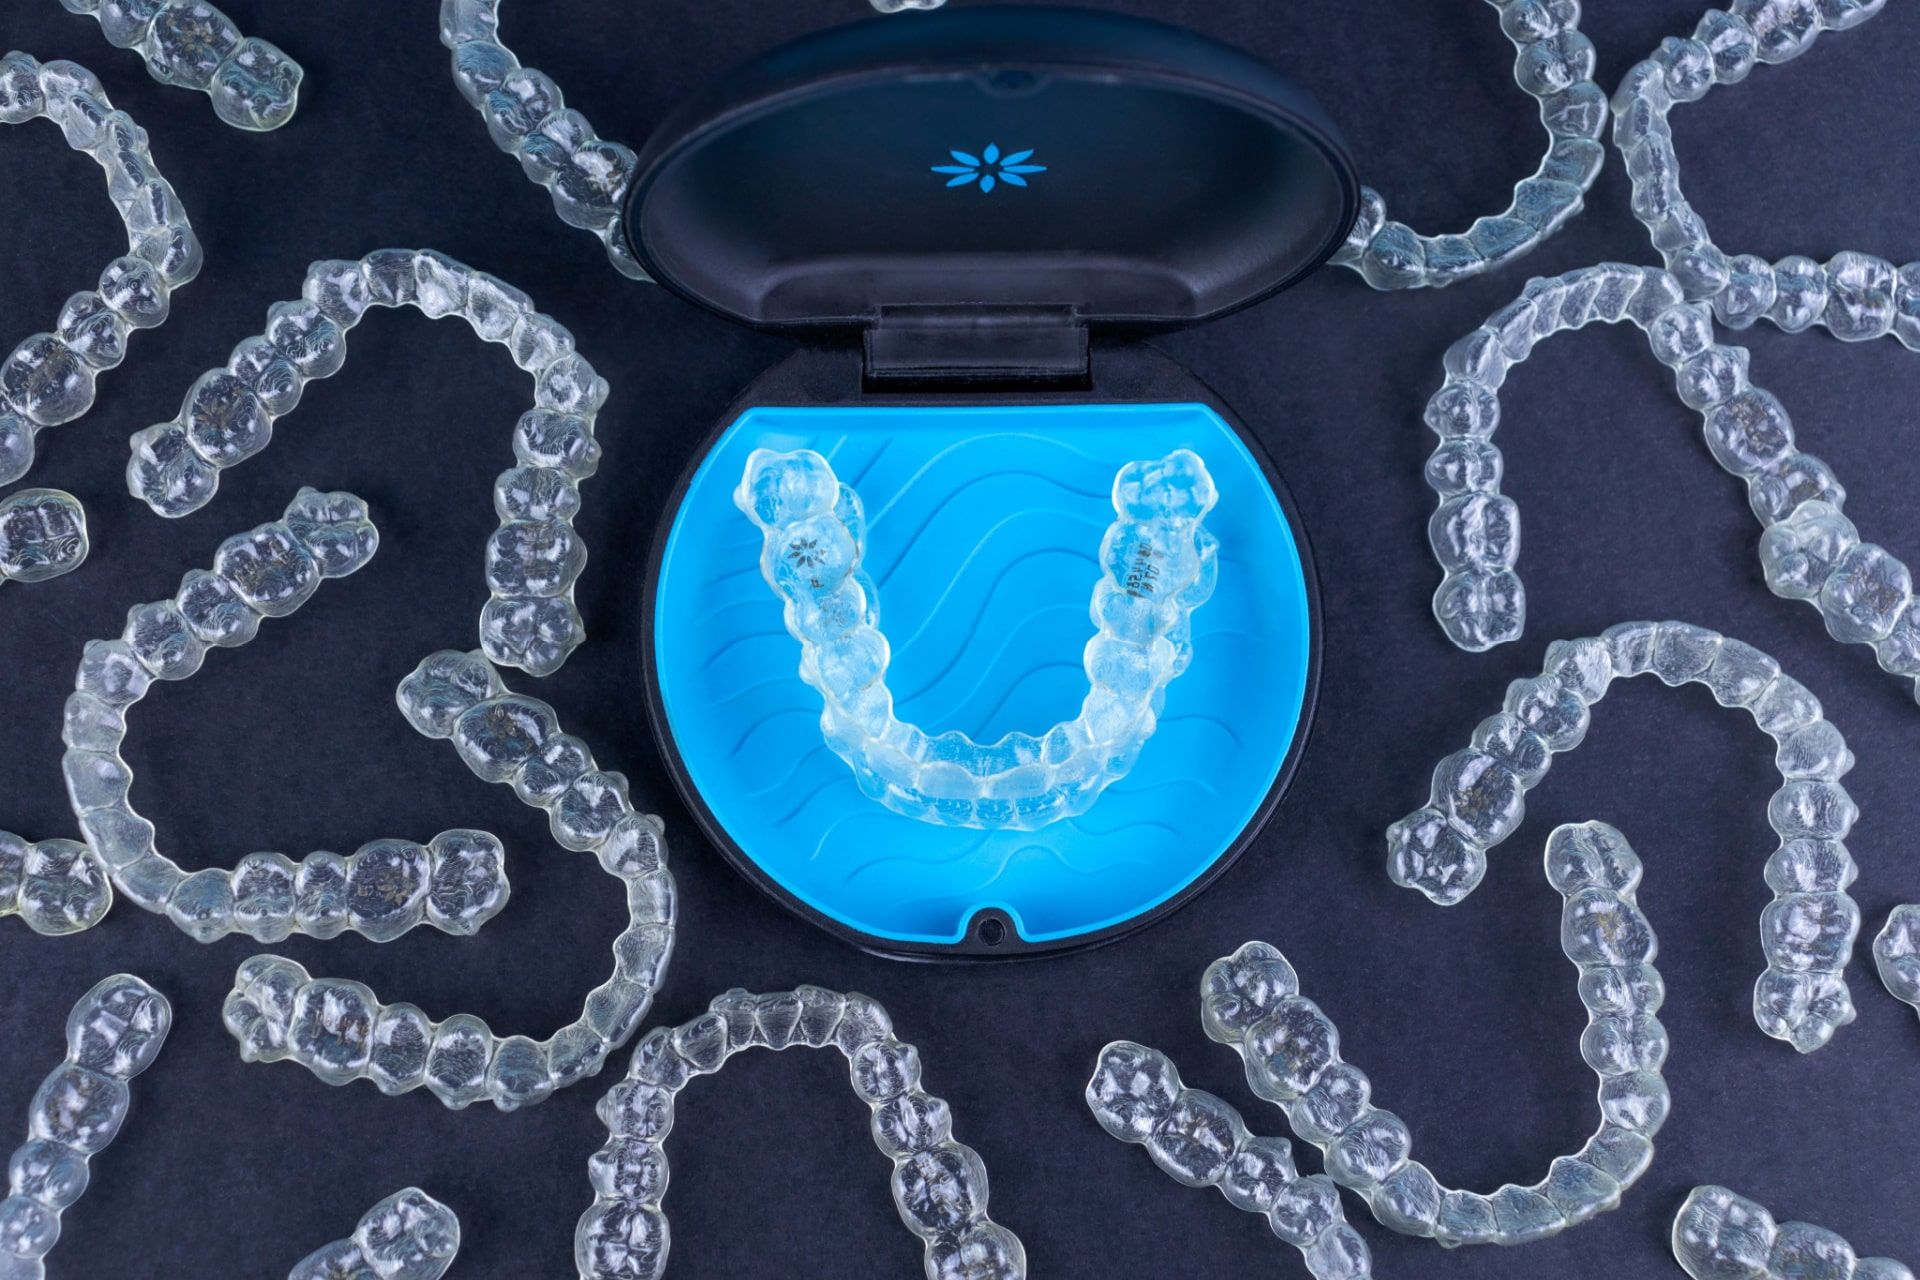 Clear Invisible Braces, Invisalign Clear Braces In Bolton - Dr Howarth  Dental